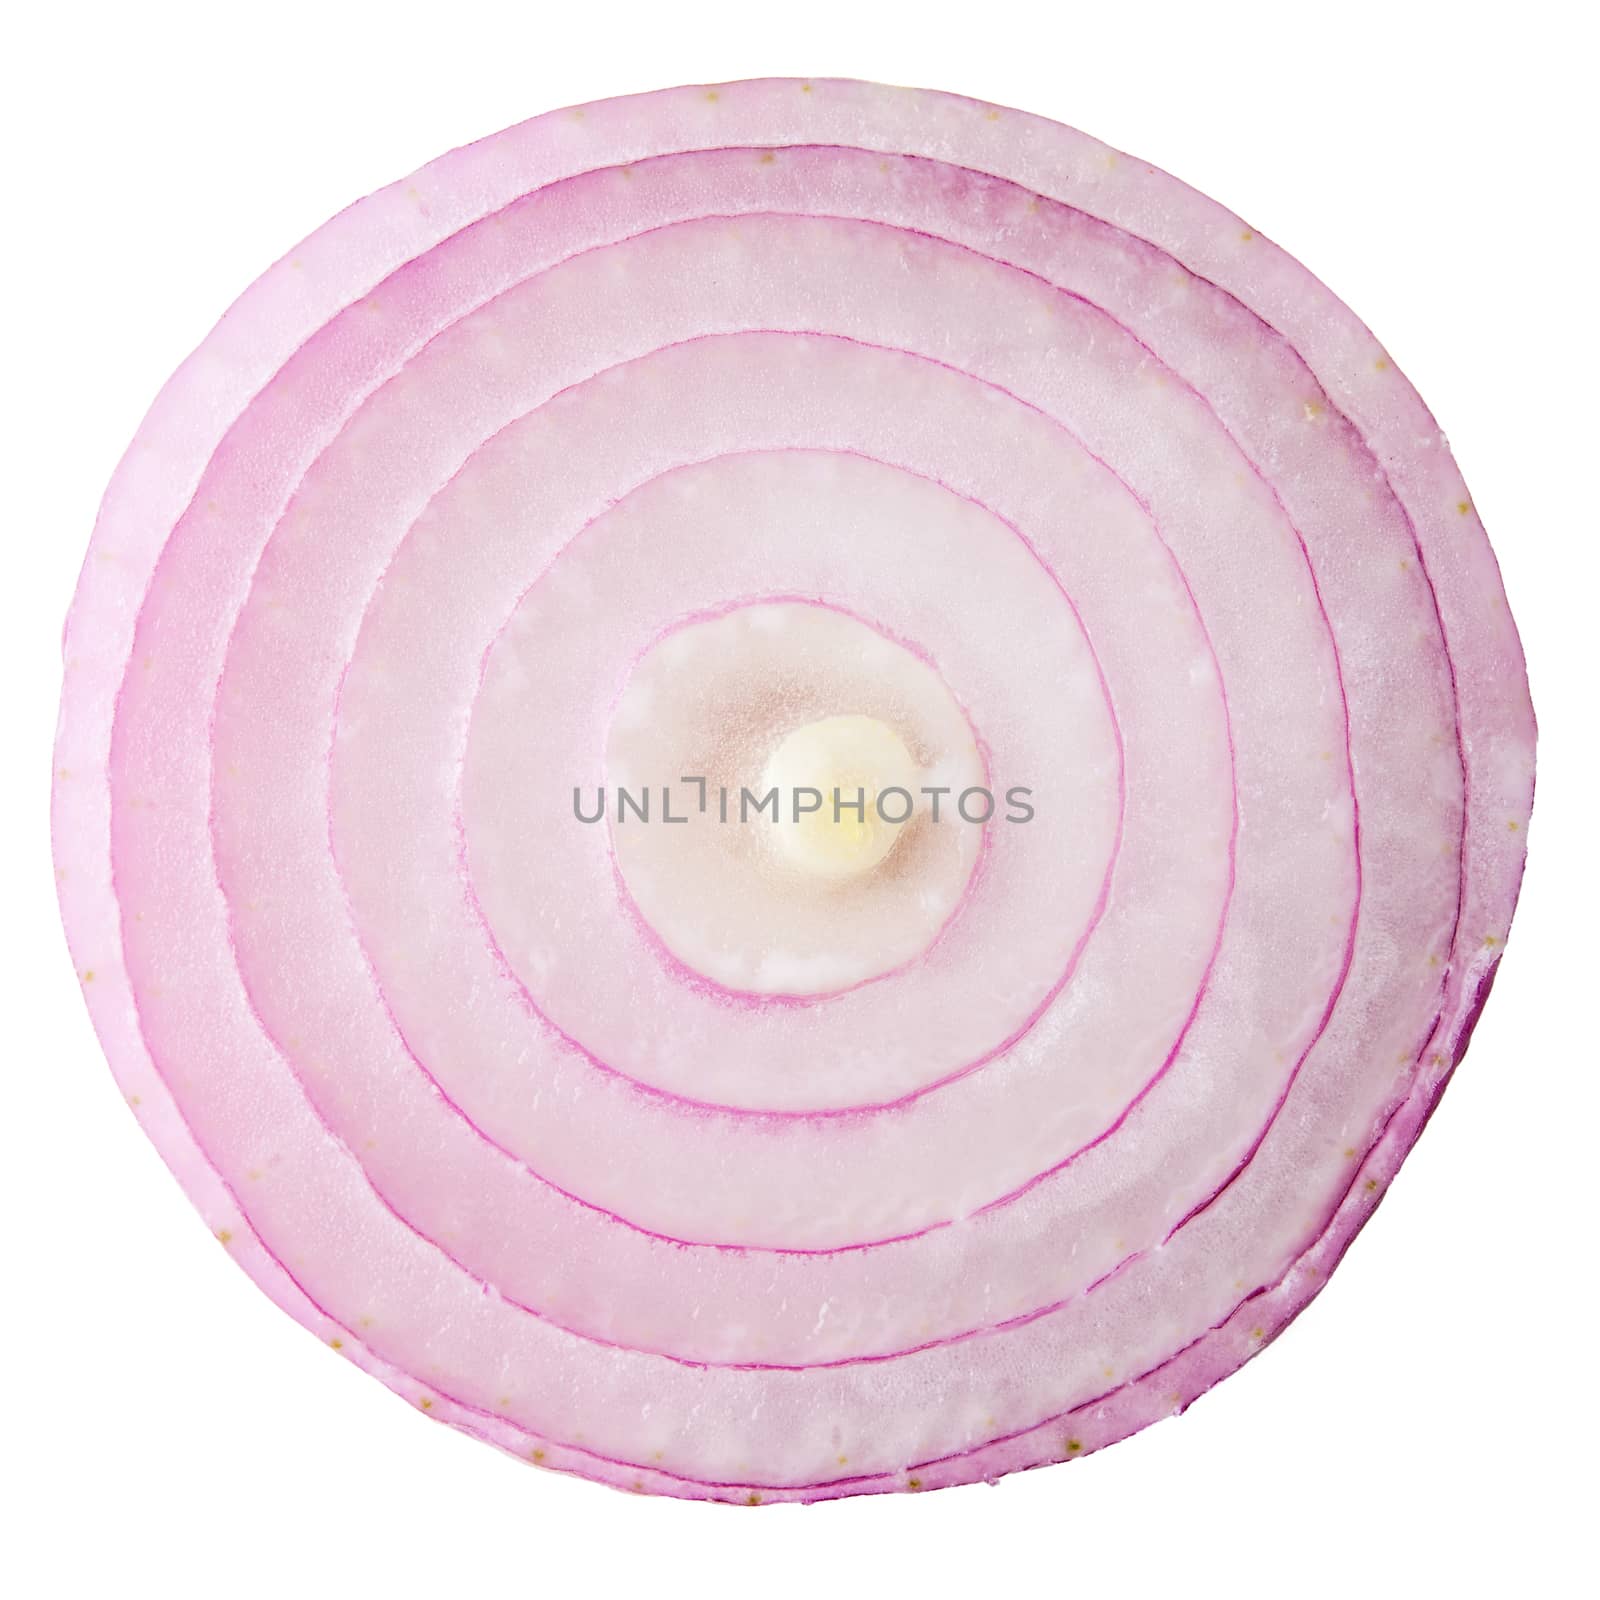 red onion by antpkr